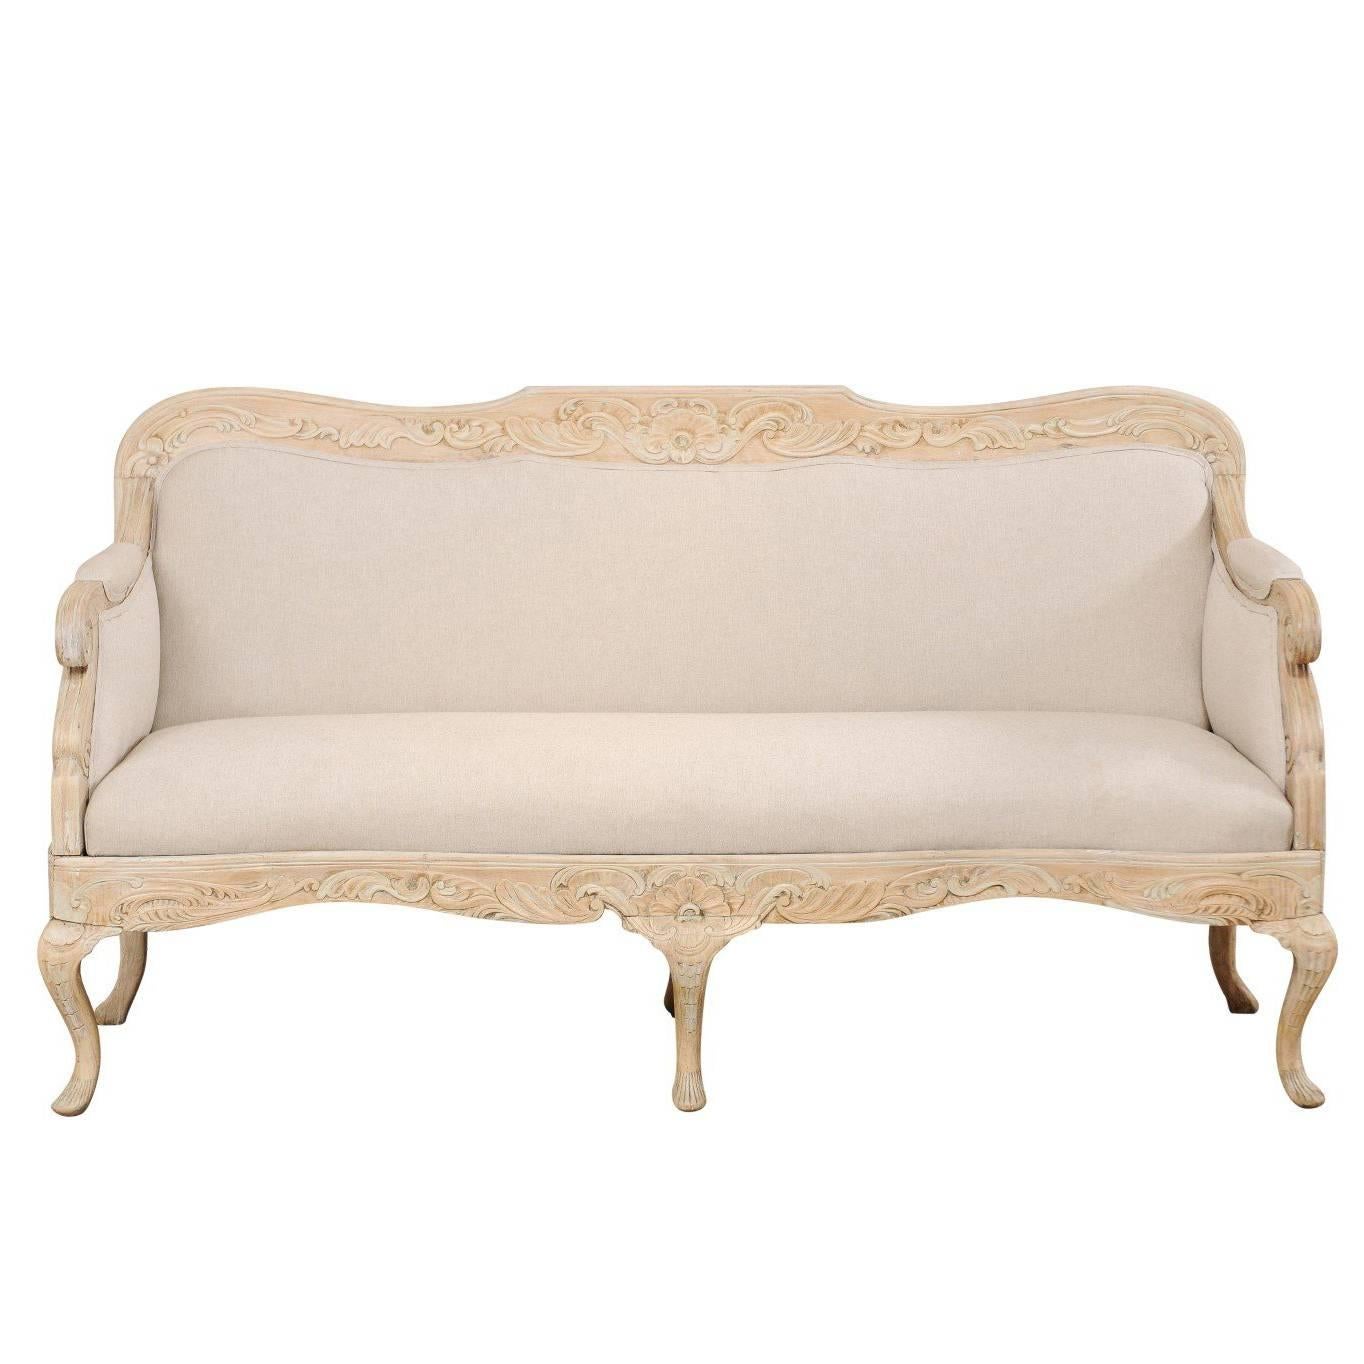 Danish Period Rococo 18th Century Sofa with Beautiful Floral Carved Details For Sale